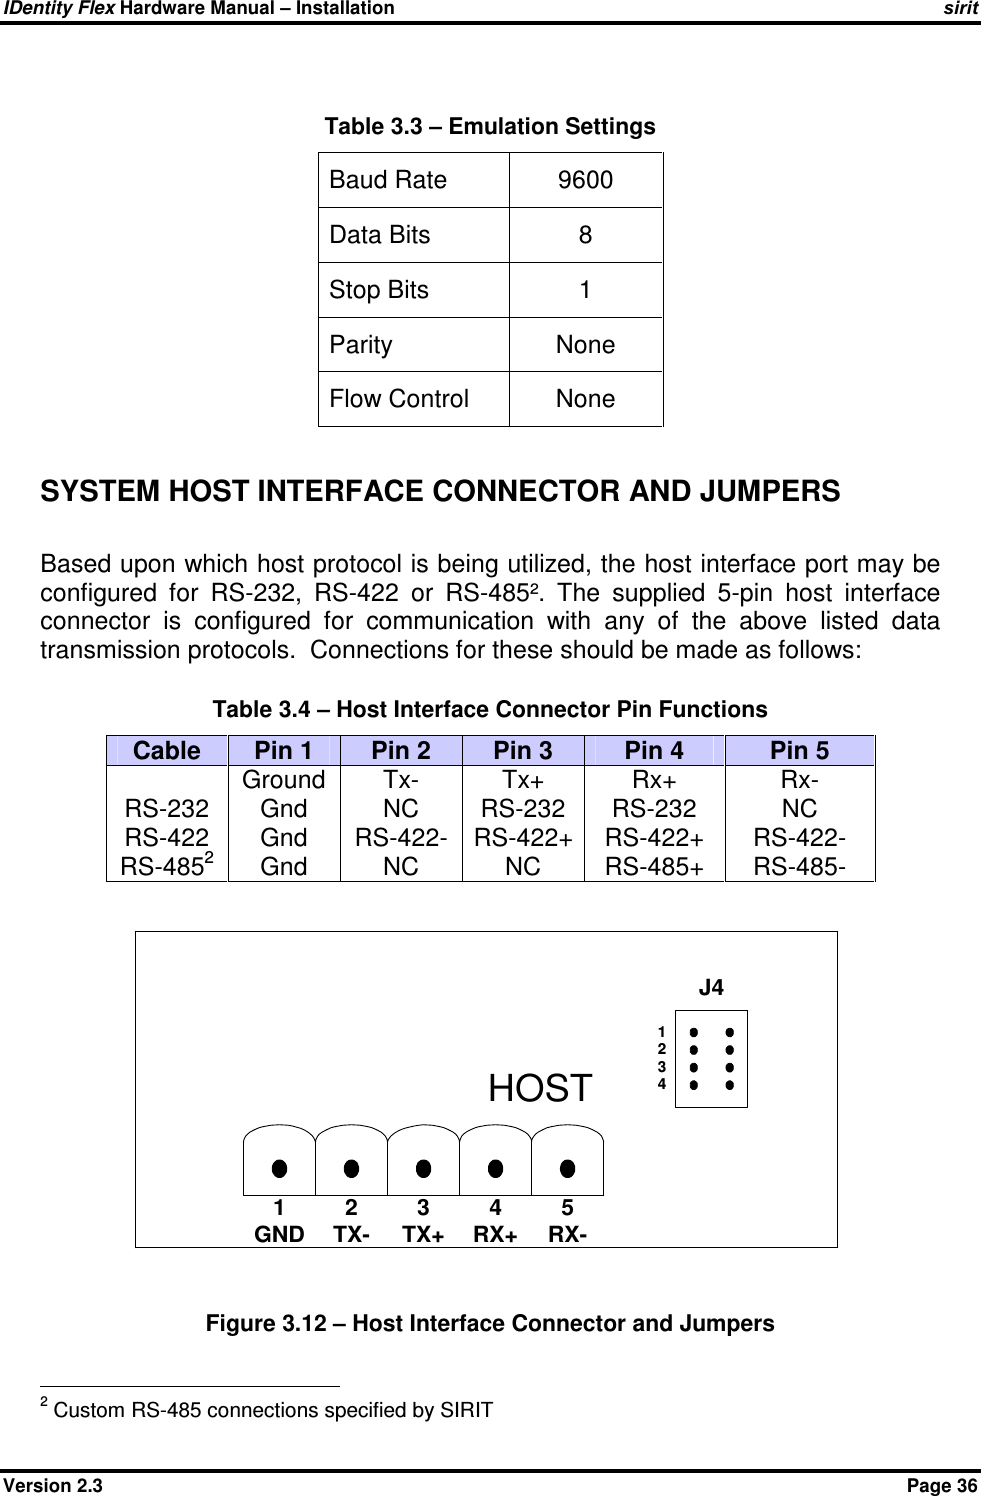 IDentity Flex Hardware Manual – Installation   sirit Version 2.3    Page 36  Table 3.3 – Emulation Settings  Baud Rate  9600 Data Bits   8 Stop Bits   1 Parity   None Flow Control  None  SYSTEM HOST INTERFACE CONNECTOR AND JUMPERS   Based upon which host protocol is being utilized, the host interface port may be configured  for  RS-232,  RS-422  or  RS-485².  The  supplied  5-pin  host  interface connector  is  configured  for  communication  with  any  of  the  above  listed  data transmission protocols.  Connections for these should be made as follows:                              Table 3.4 – Host Interface Connector Pin Functions Cable  Pin 1  Pin 2  Pin 3  Pin 4  Pin 5  RS-232 RS-422 RS-4852 Ground Gnd Gnd Gnd Tx- NC RS-422- NC Tx+ RS-232 RS-422+ NC Rx+ RS-232 RS-422+ RS-485+ Rx- NC RS-422- RS-485-   Figure 3.12 – Host Interface Connector and Jumpers                                             2 Custom RS-485 connections specified by SIRIT J41GND2TX-3TX+4RX+5RX-HOST1234